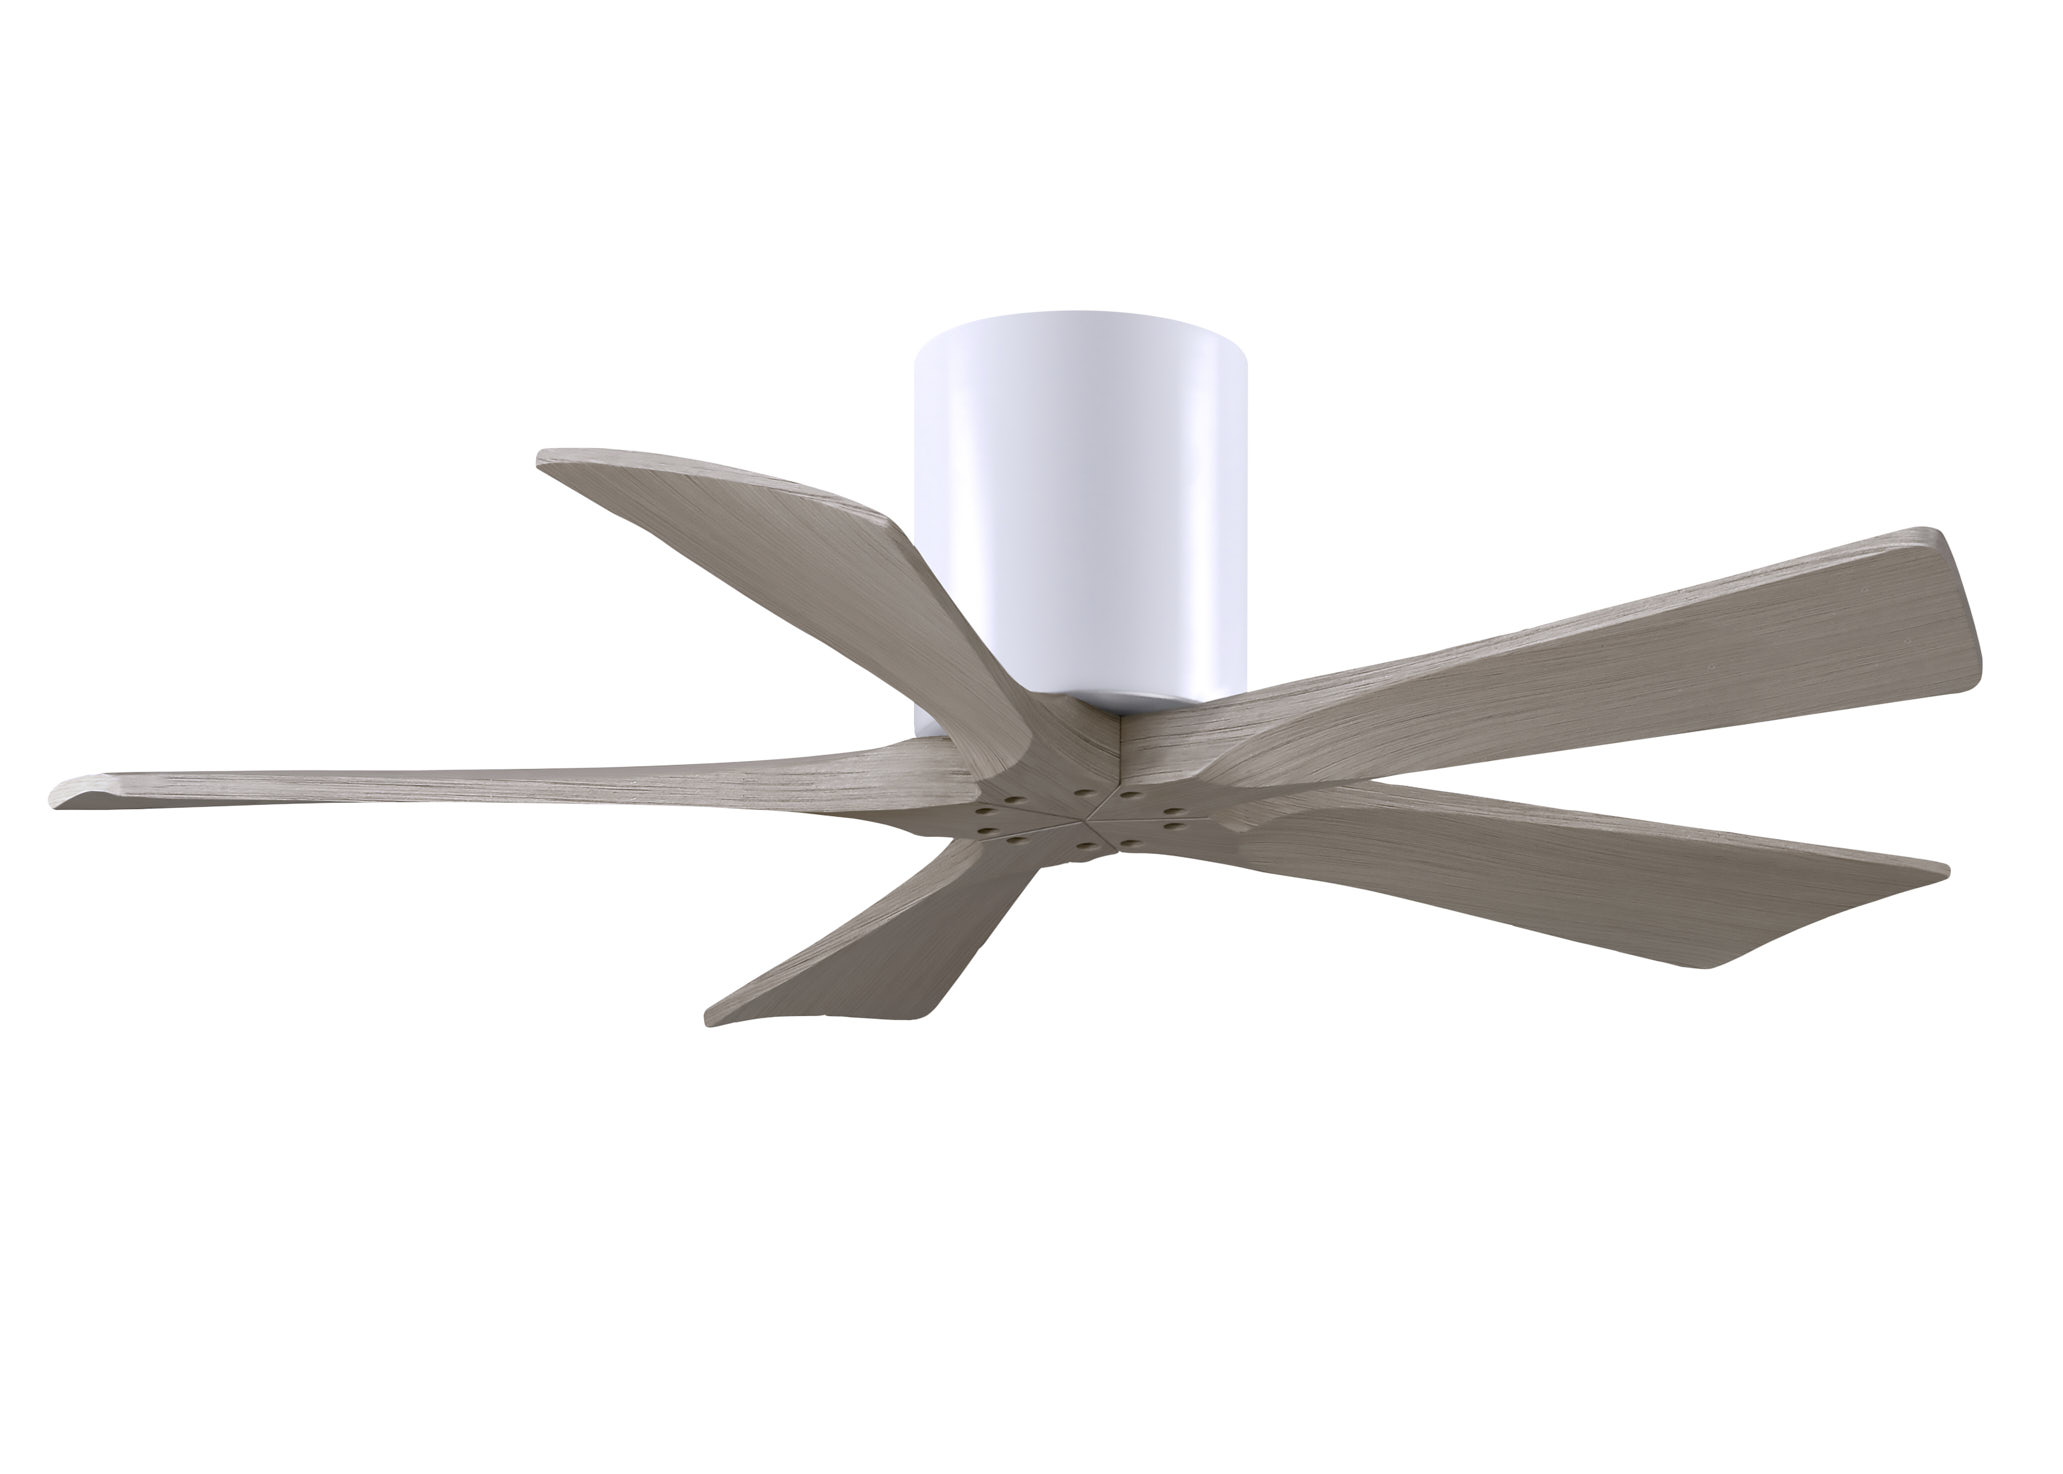 Irene-5H 6-speed ceiling fan in gloss white finish with 42